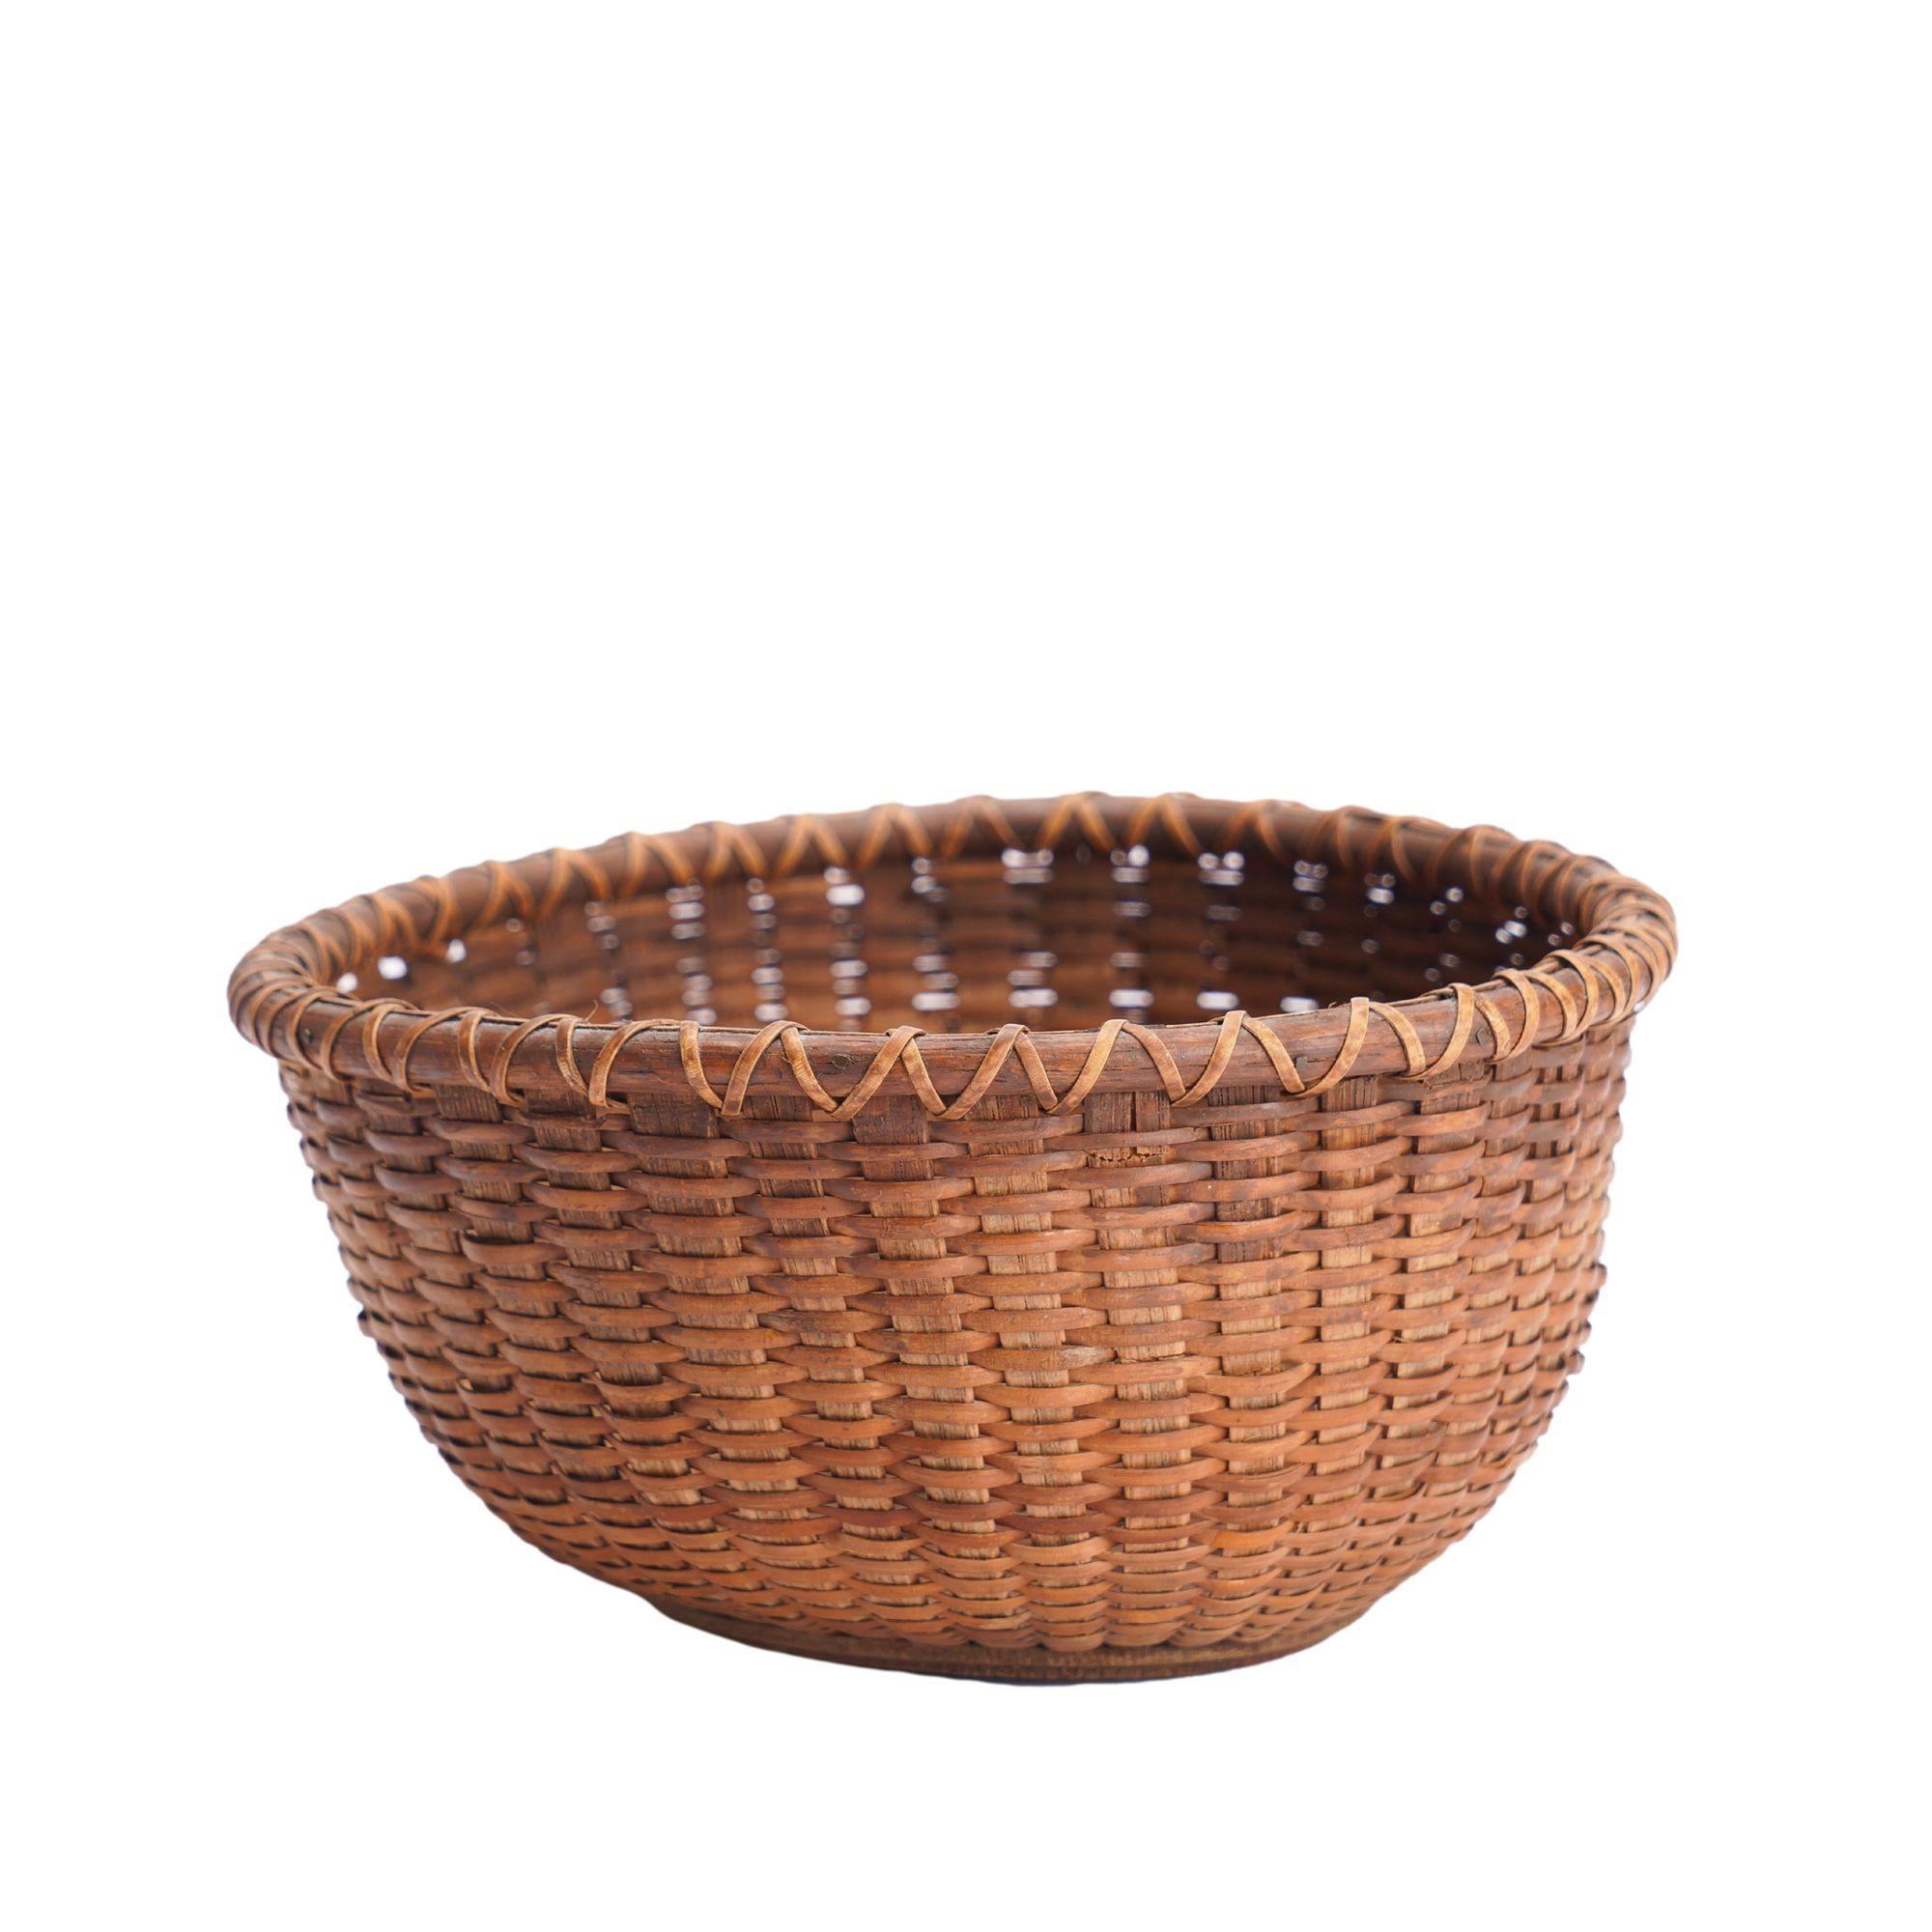 Folk Art Nantucket basket attributed to the Coffin School, 1900's For Sale